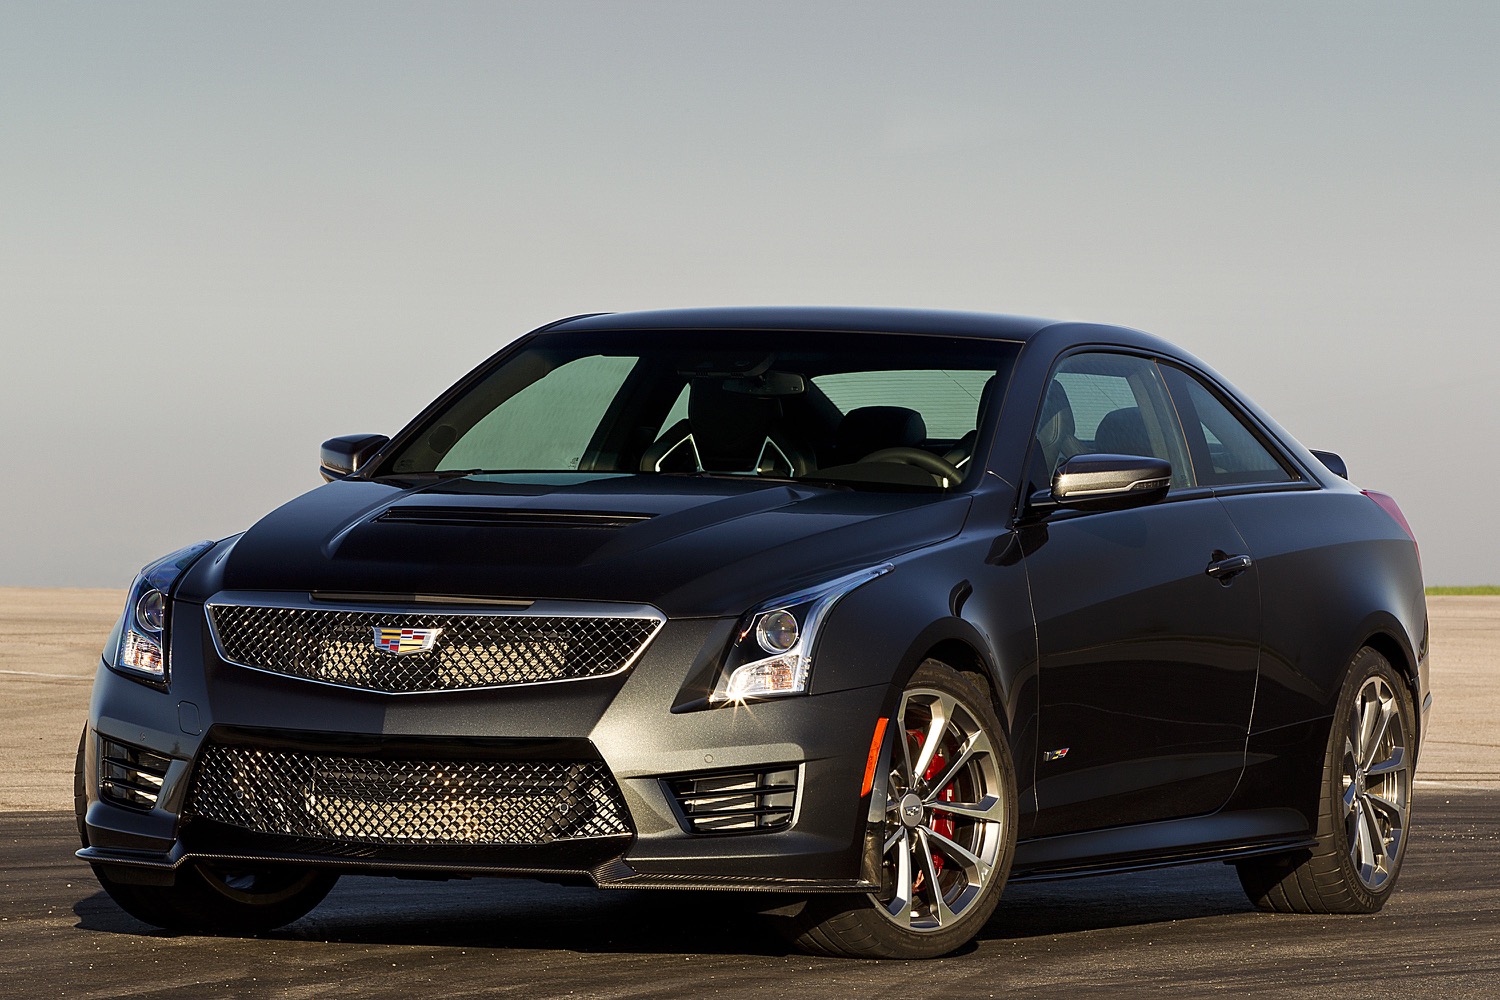 Some Stunning Pictures Of The 2016 Cadillac ATS-V Coupe At The Track ...